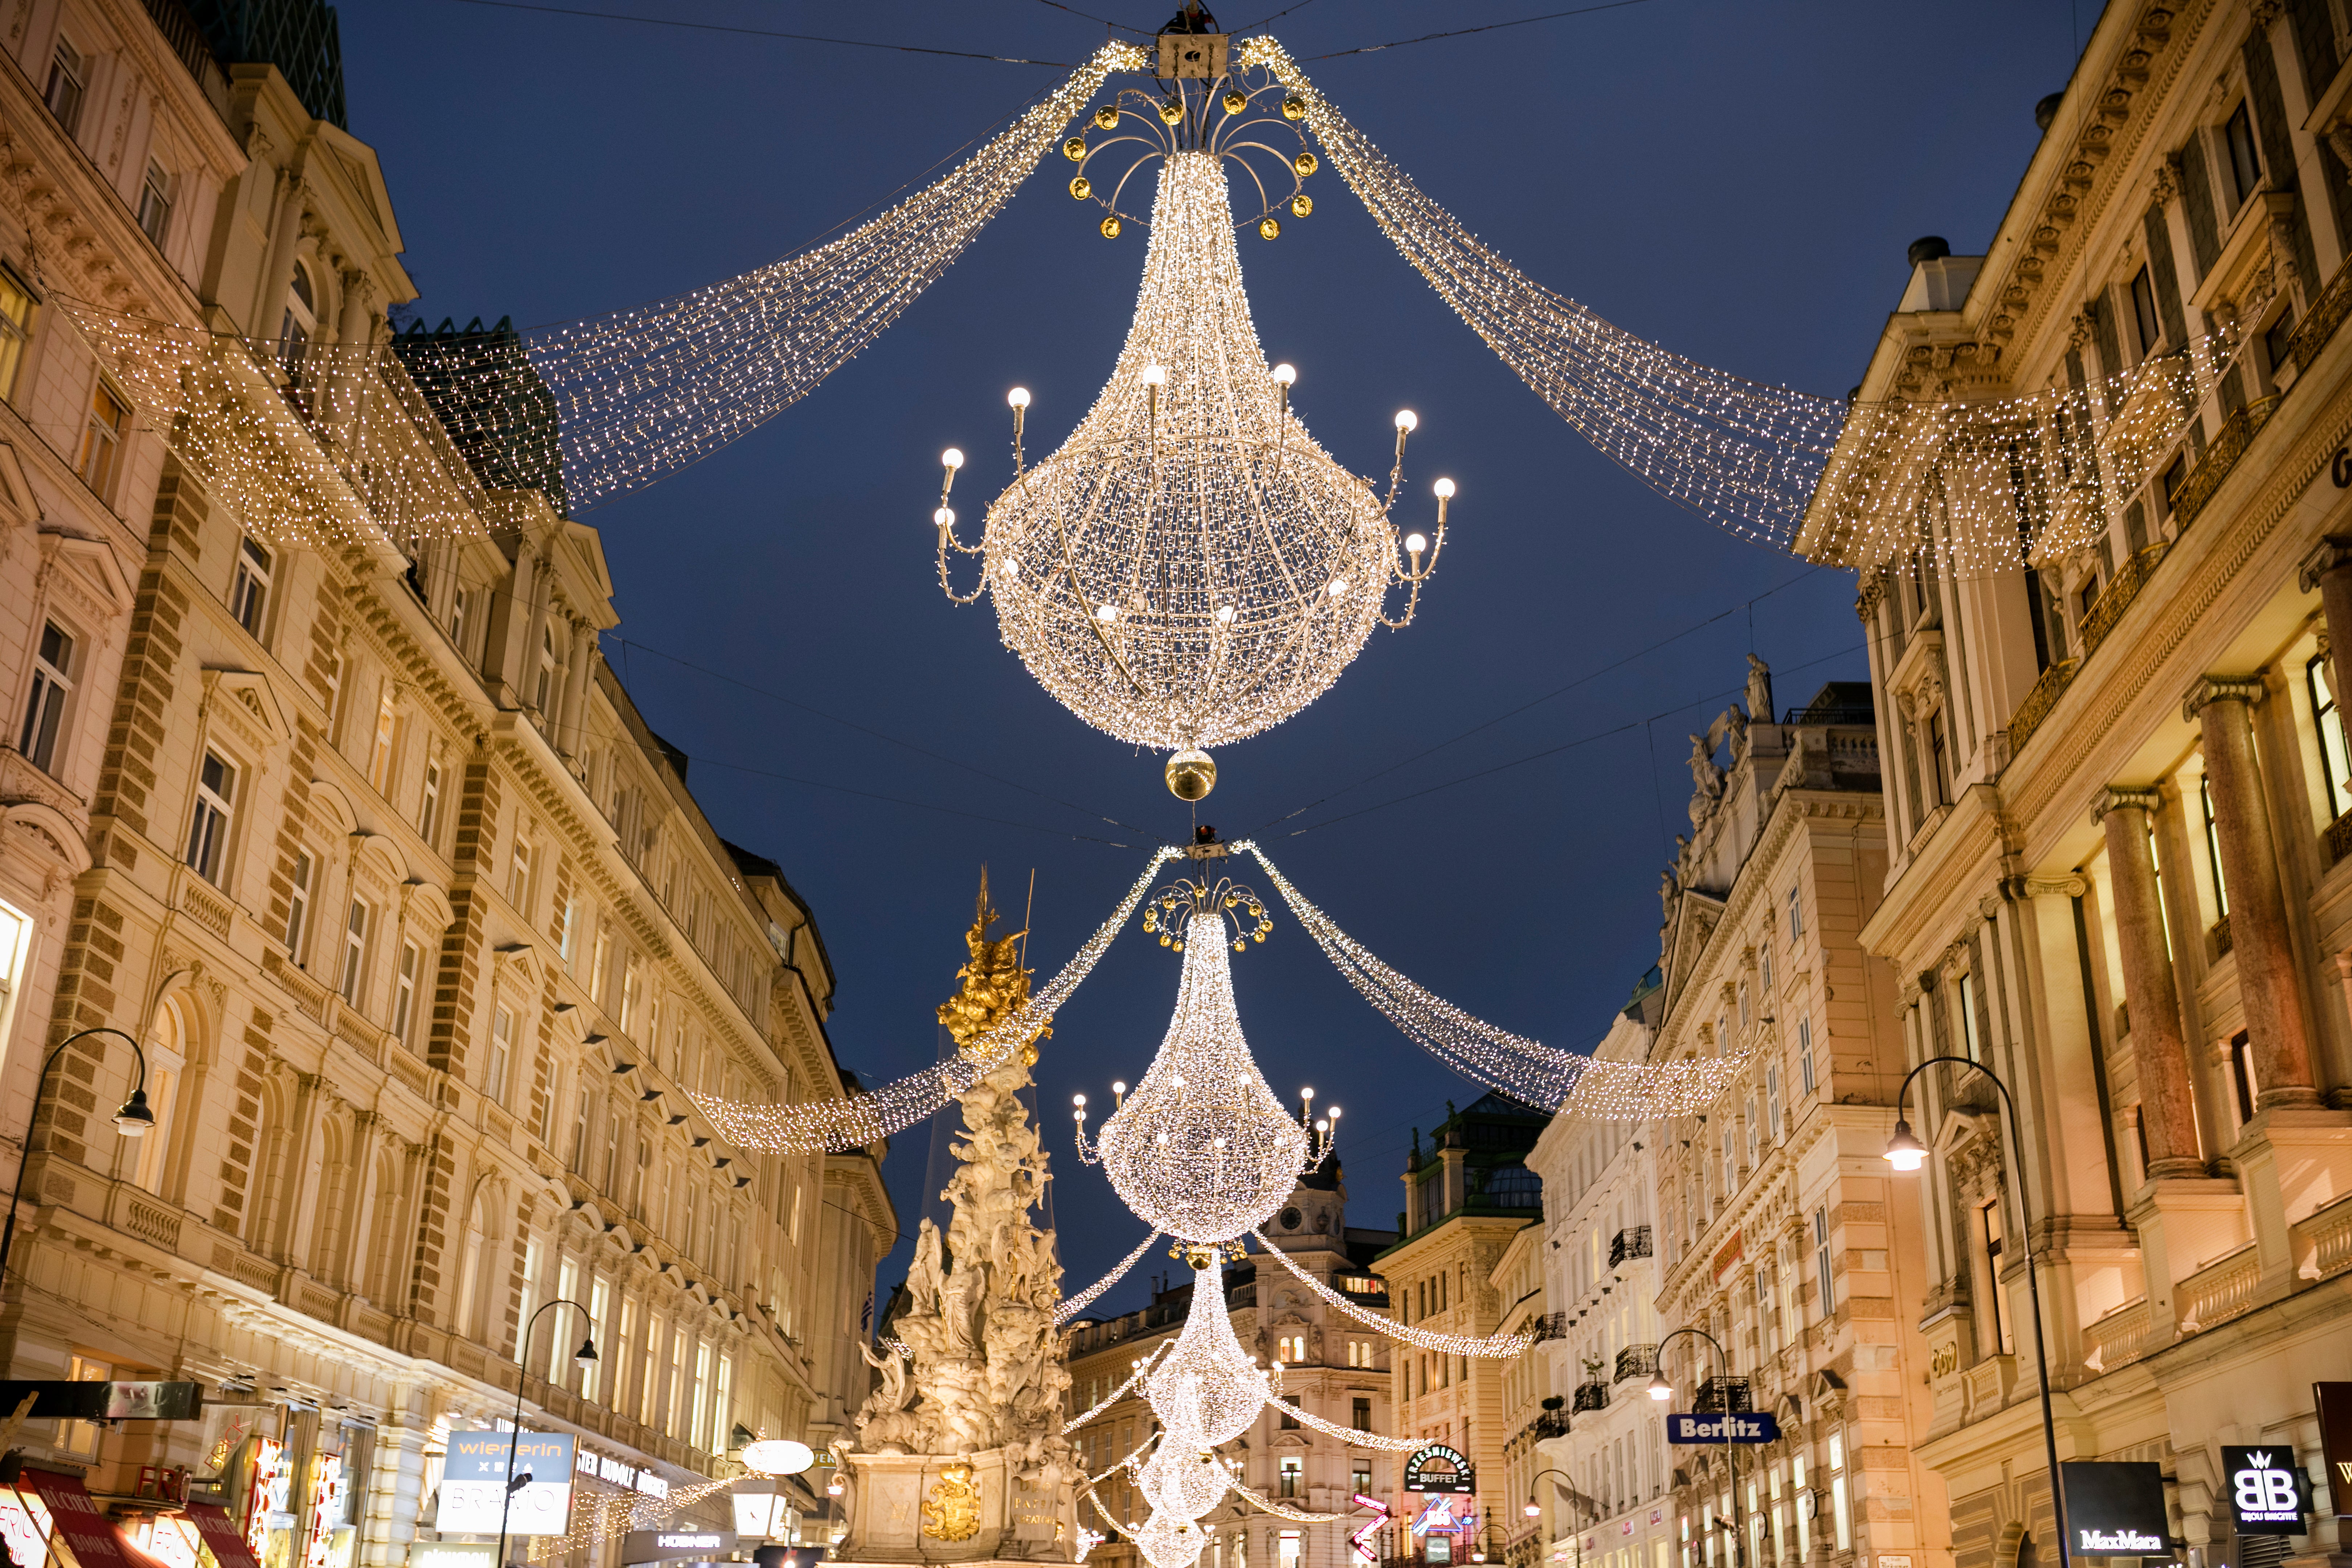 Vienna’s Christmas lights decorate much of the city